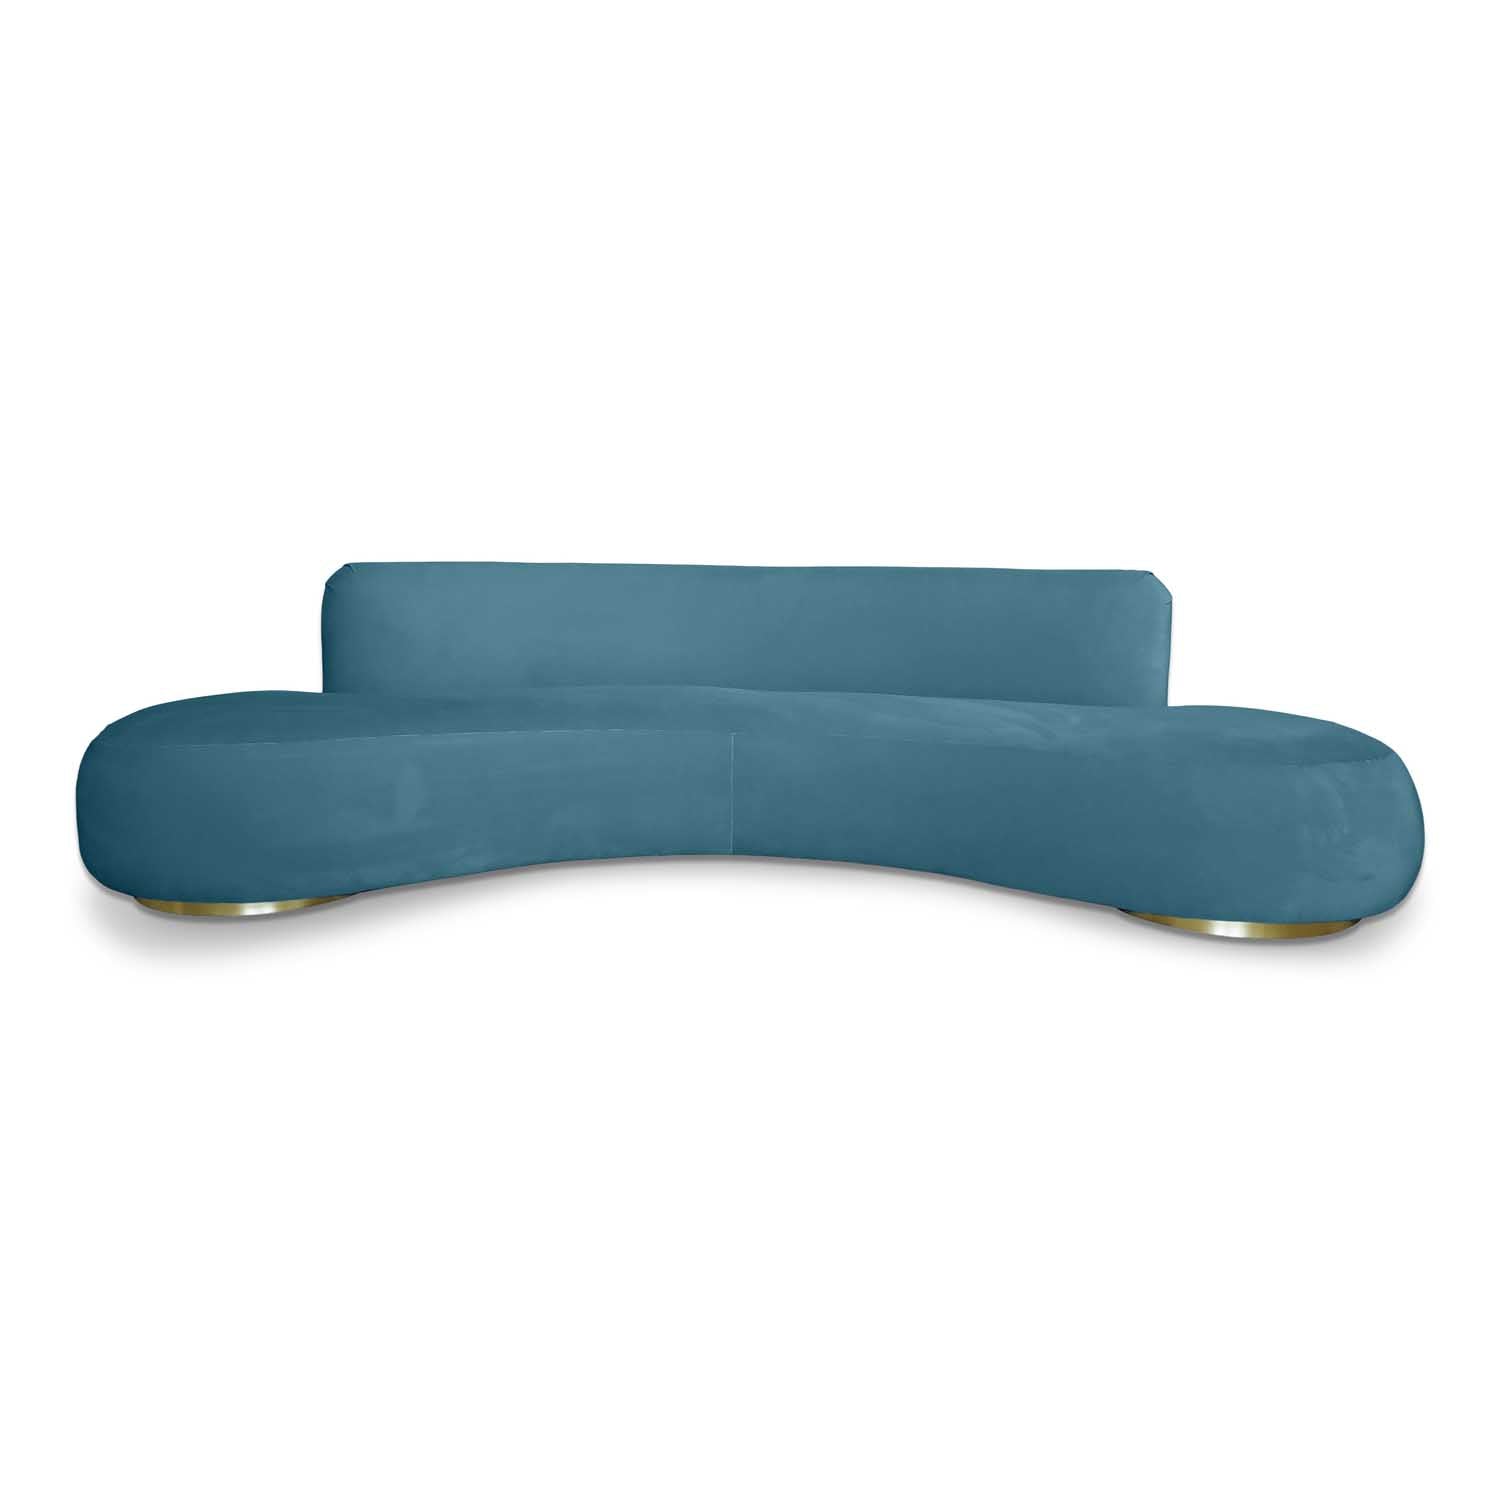 Luxurious Living at Its Finest, crescent shaped sofa